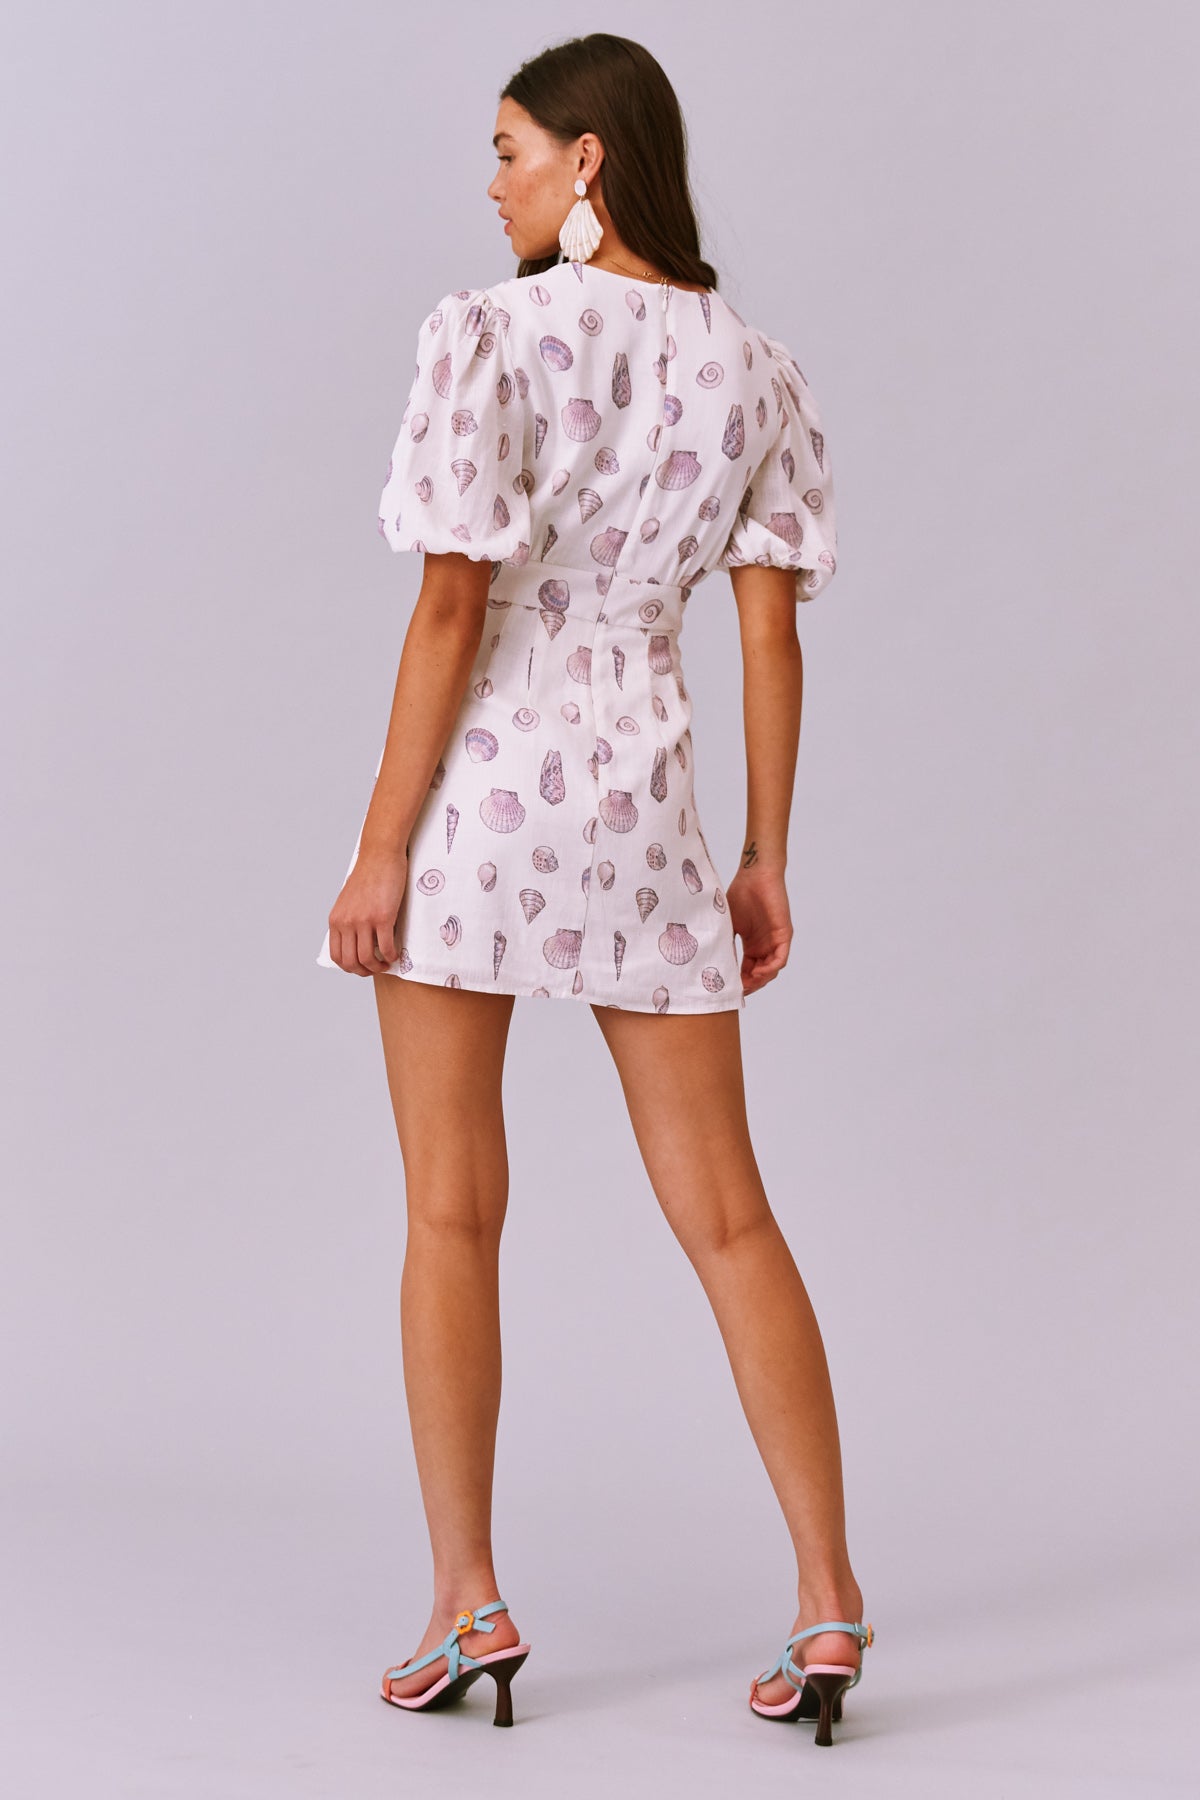 Calypso SS Mini Dress by Finders Keepers.